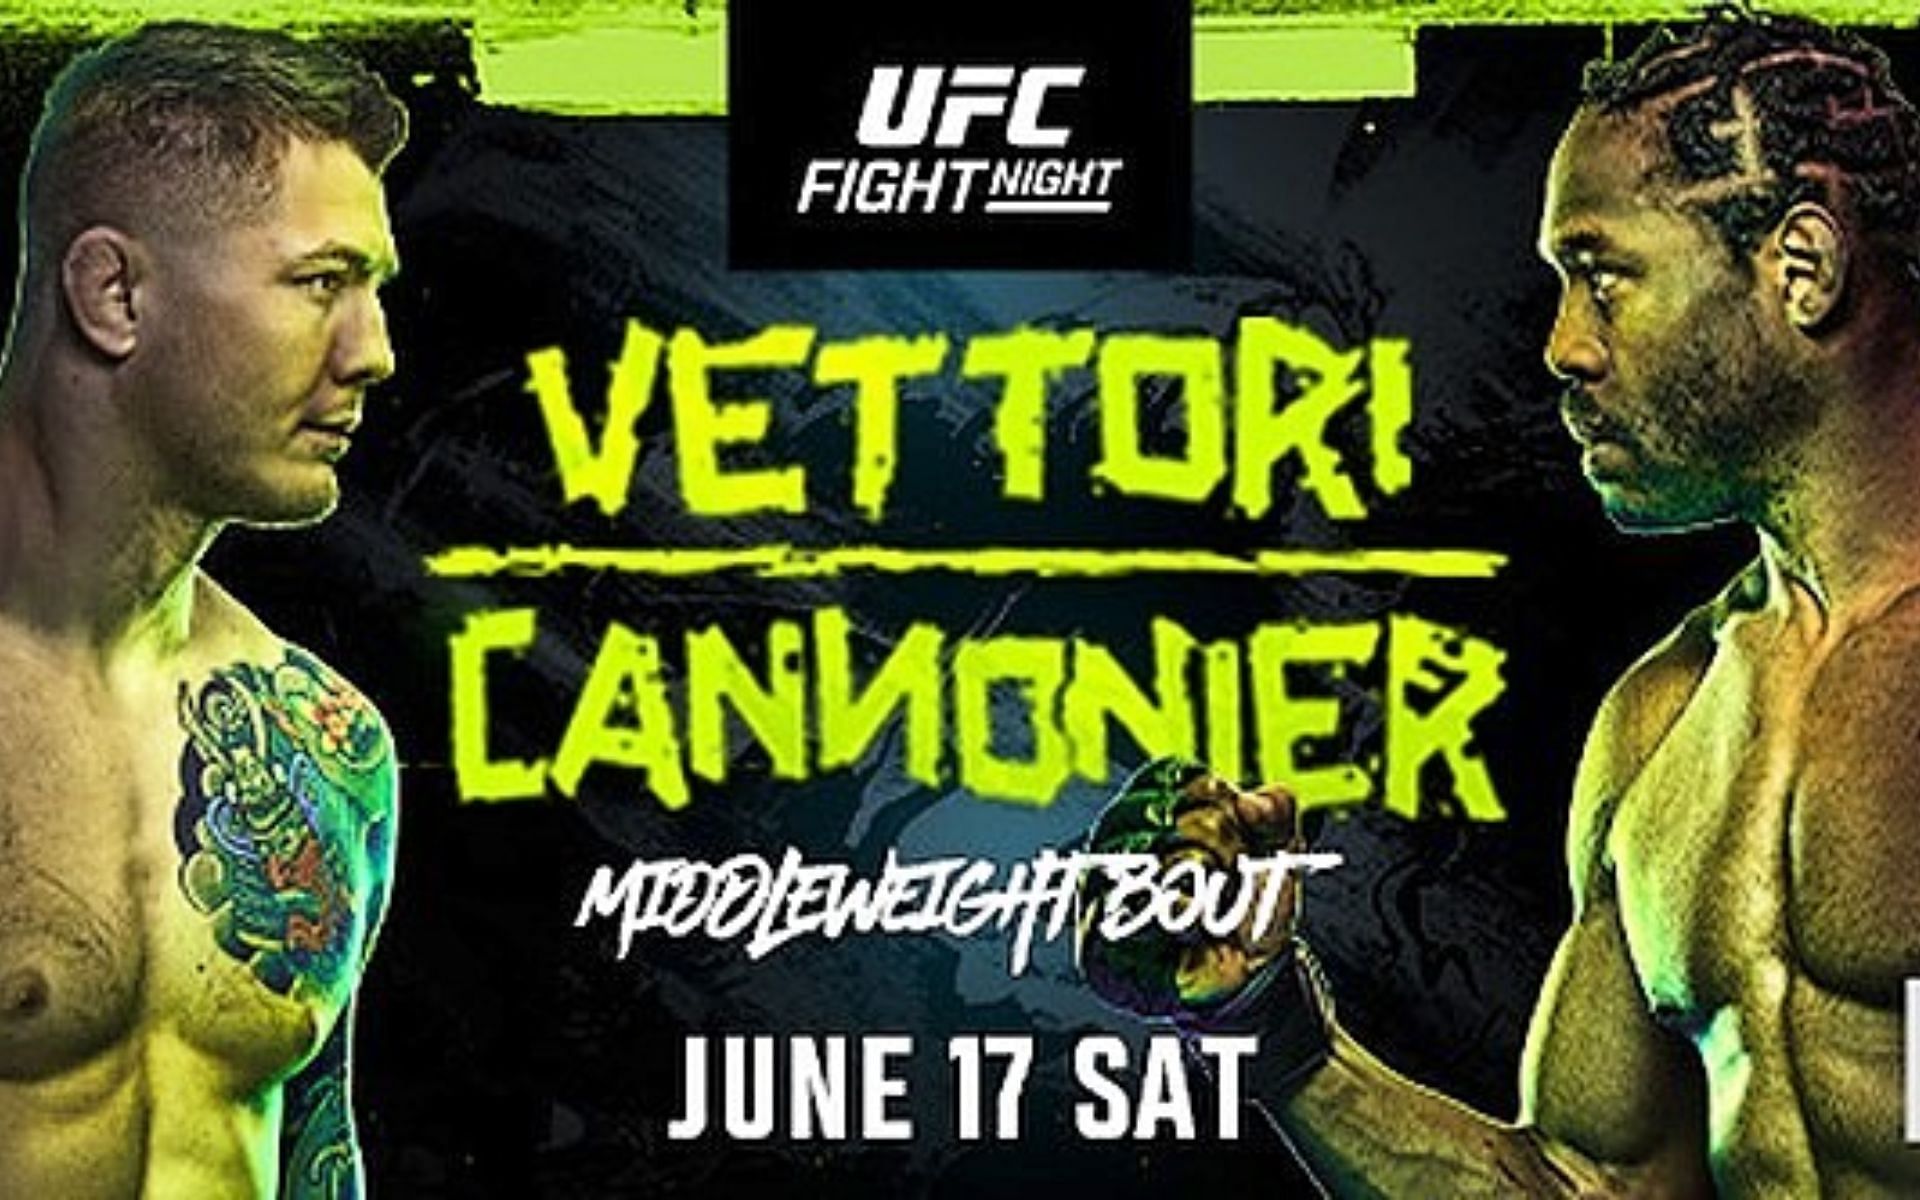 Marvin Vettori fights Jared Cannonier this weekend in a key middleweight bout